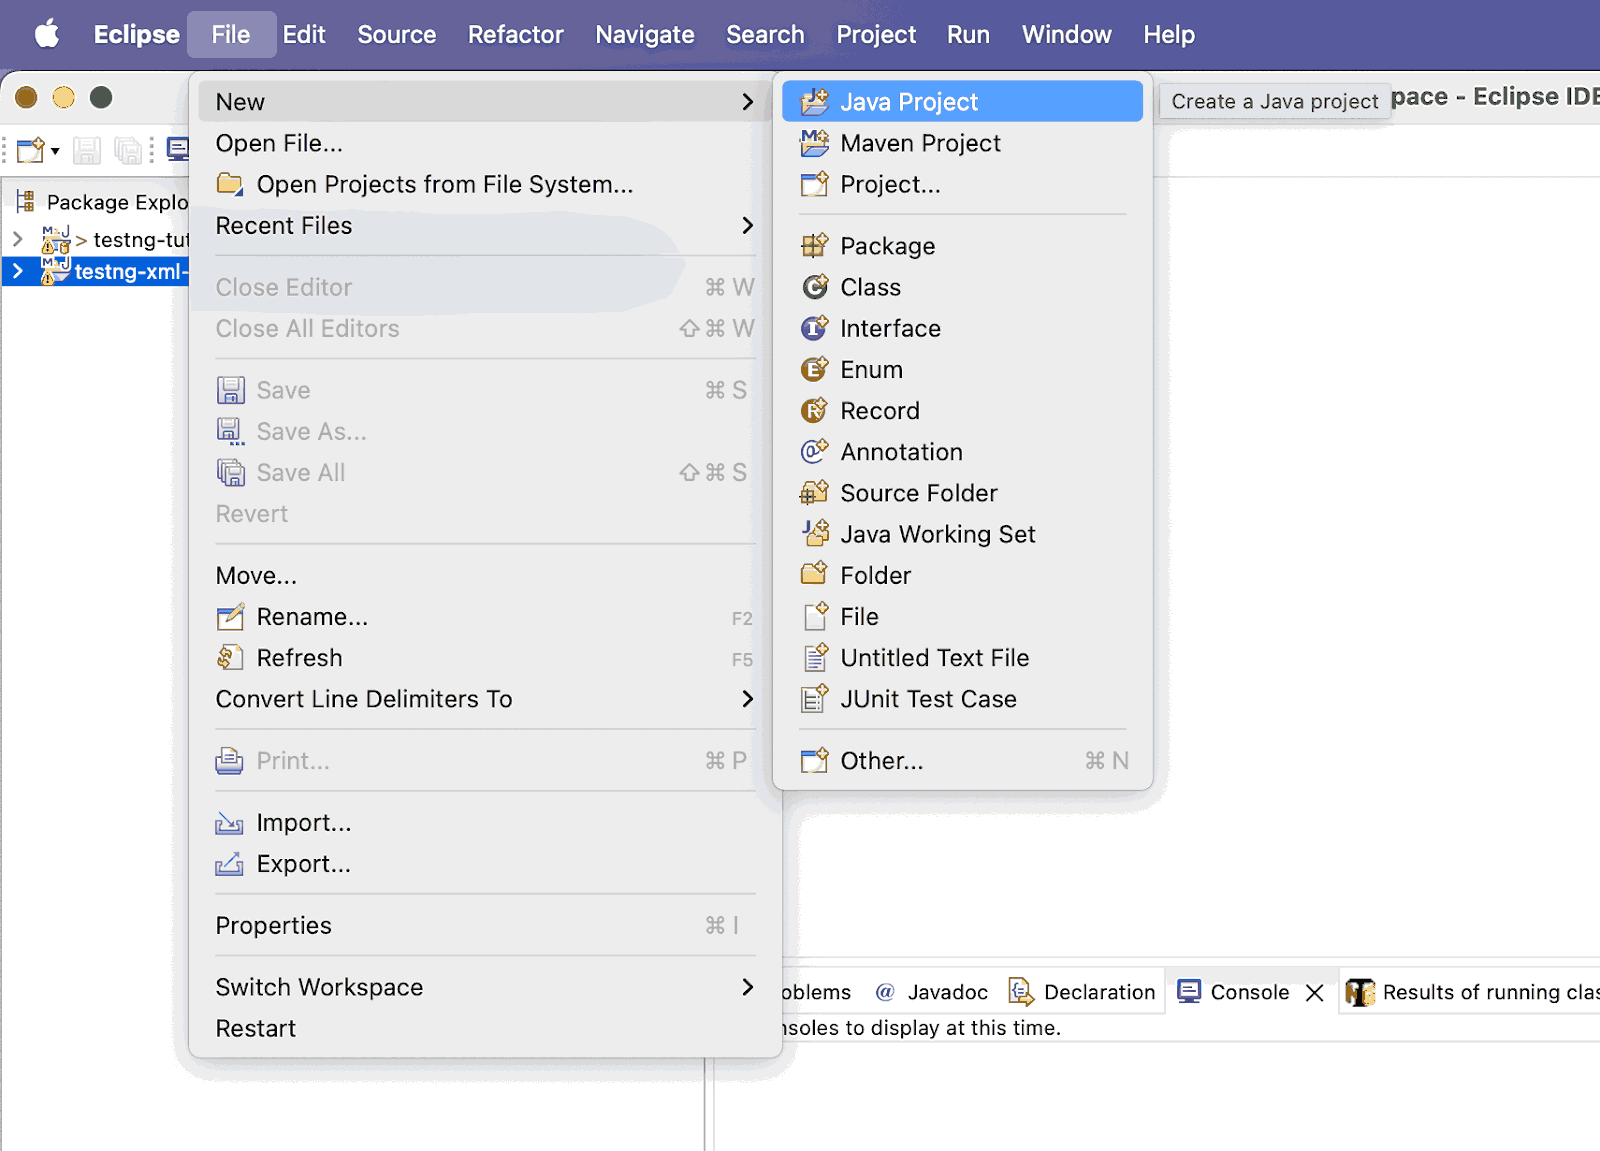 Create a new Java Project in Eclipse IDE